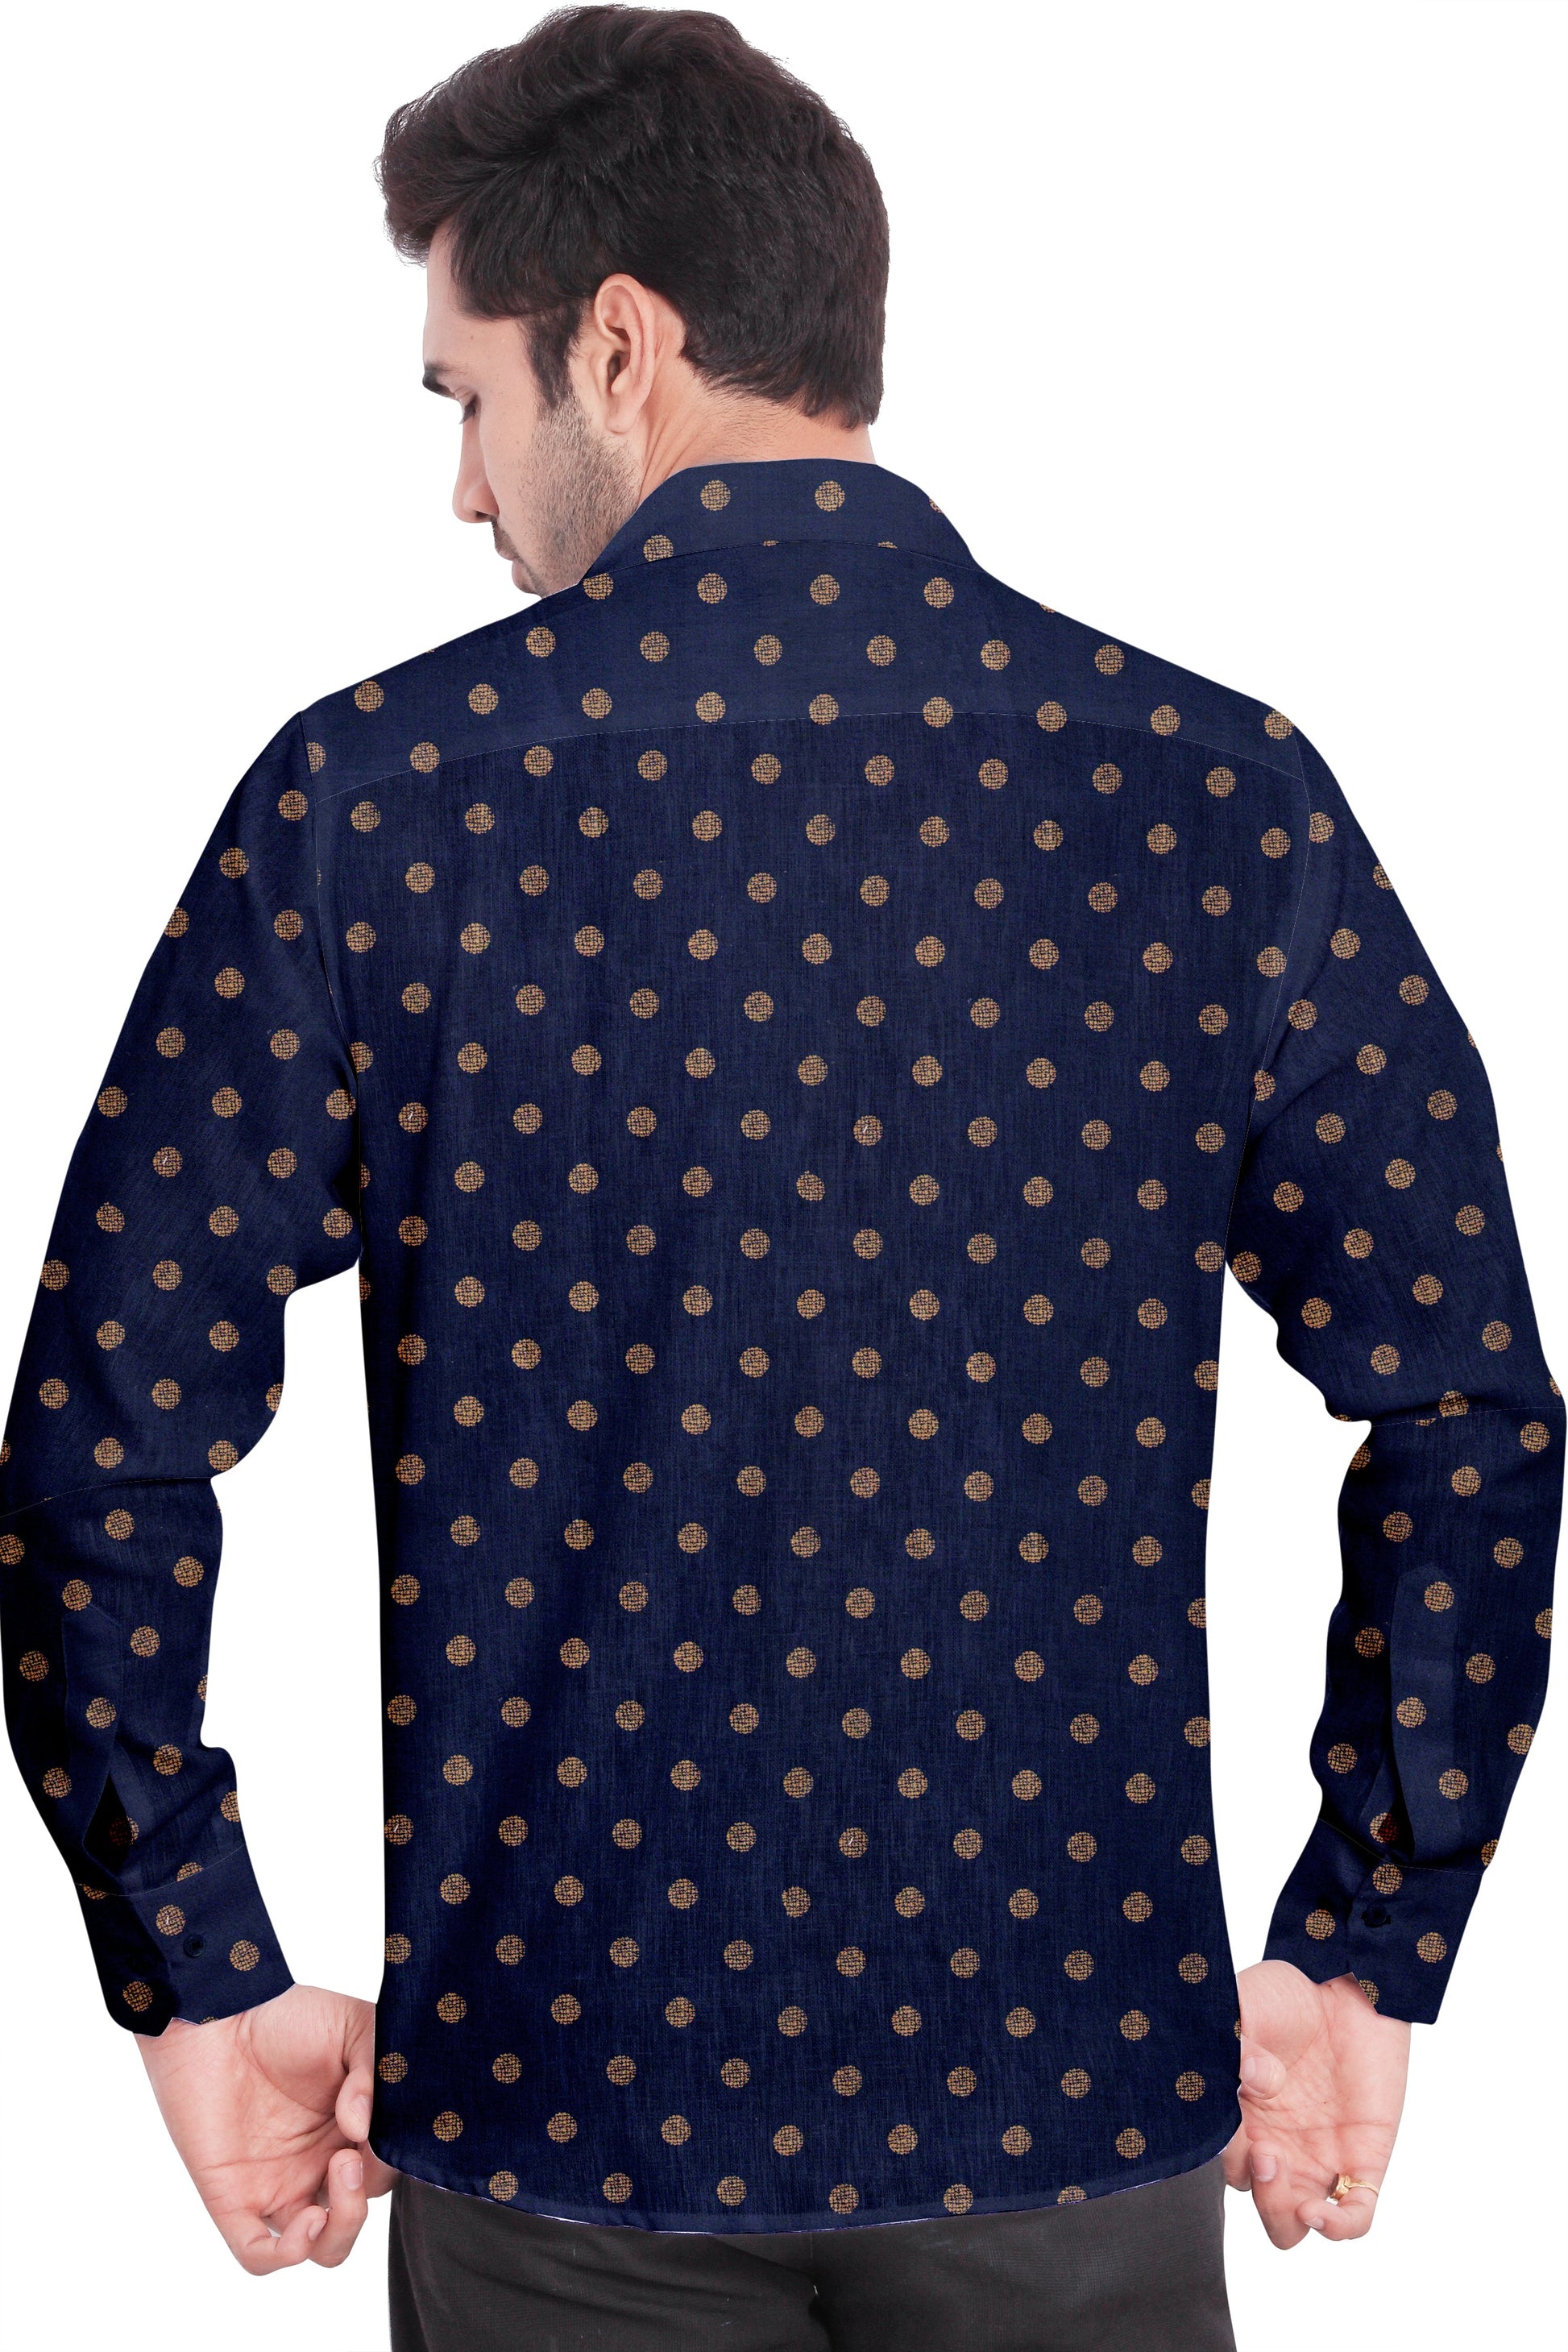 Men's Blue Yellow Dotted Casual Full Sleeves 100% Cotton - Styleflea